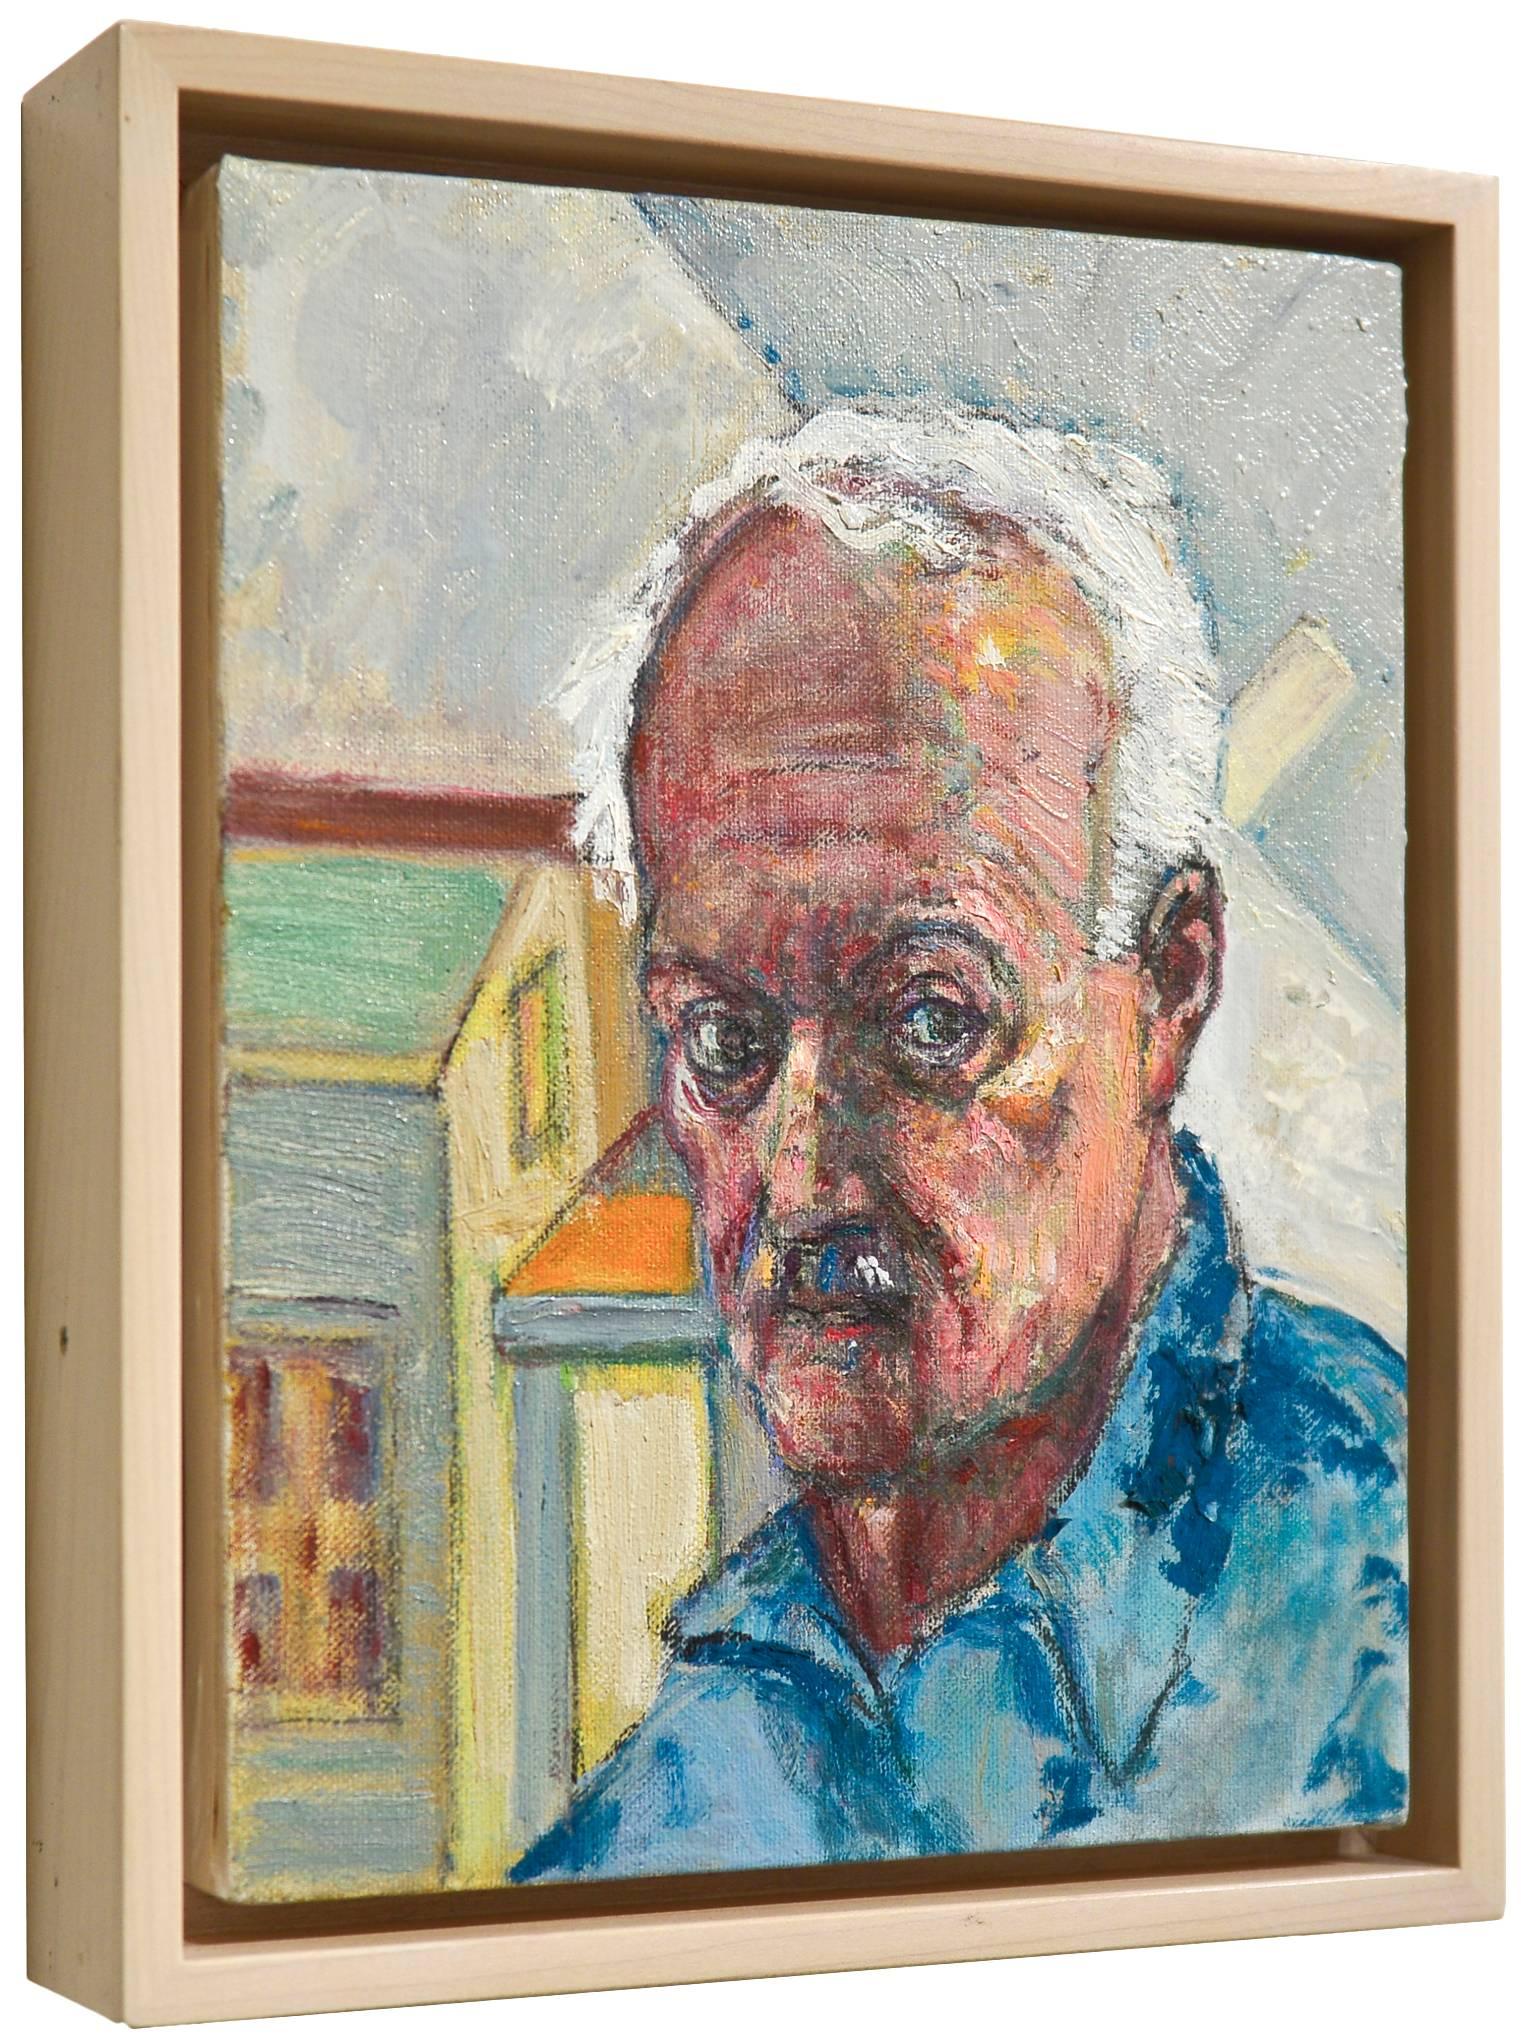 Self Portrait - Abstract Painting by Bernard Chaet